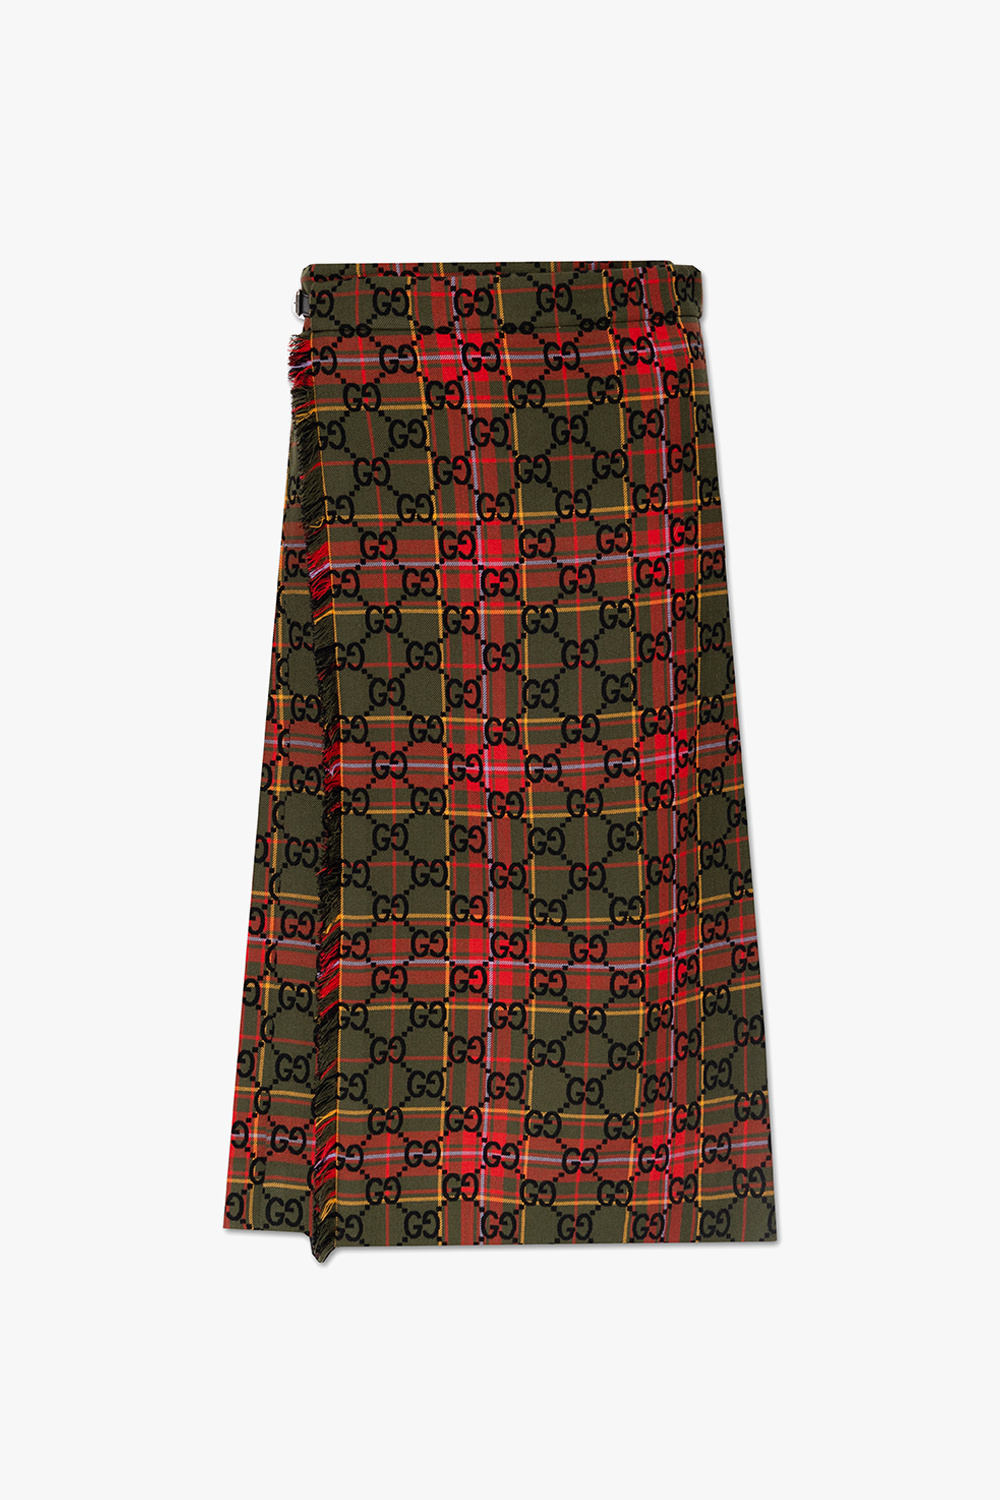 Gucci Checked skirt